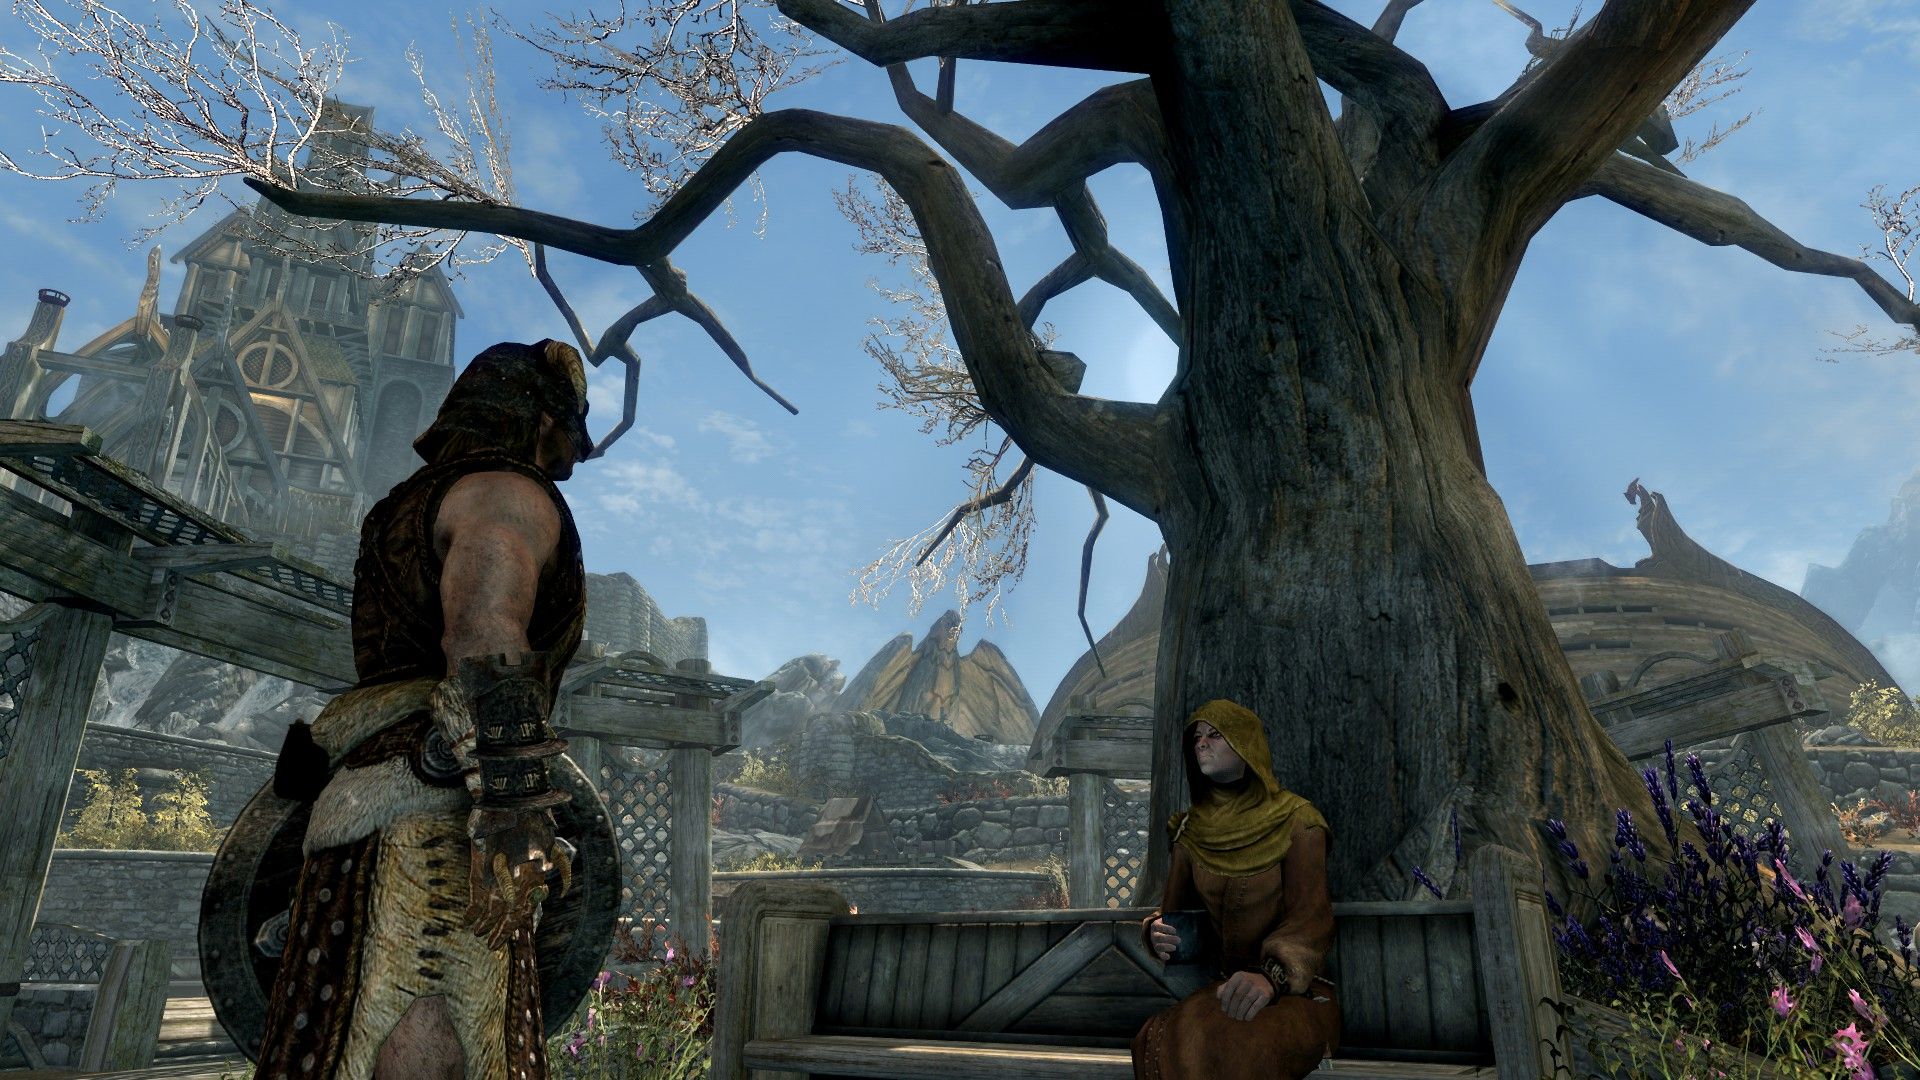 A man speaks to a priestess by the dried-out trunk of a dying tree in the center of a rustic city.